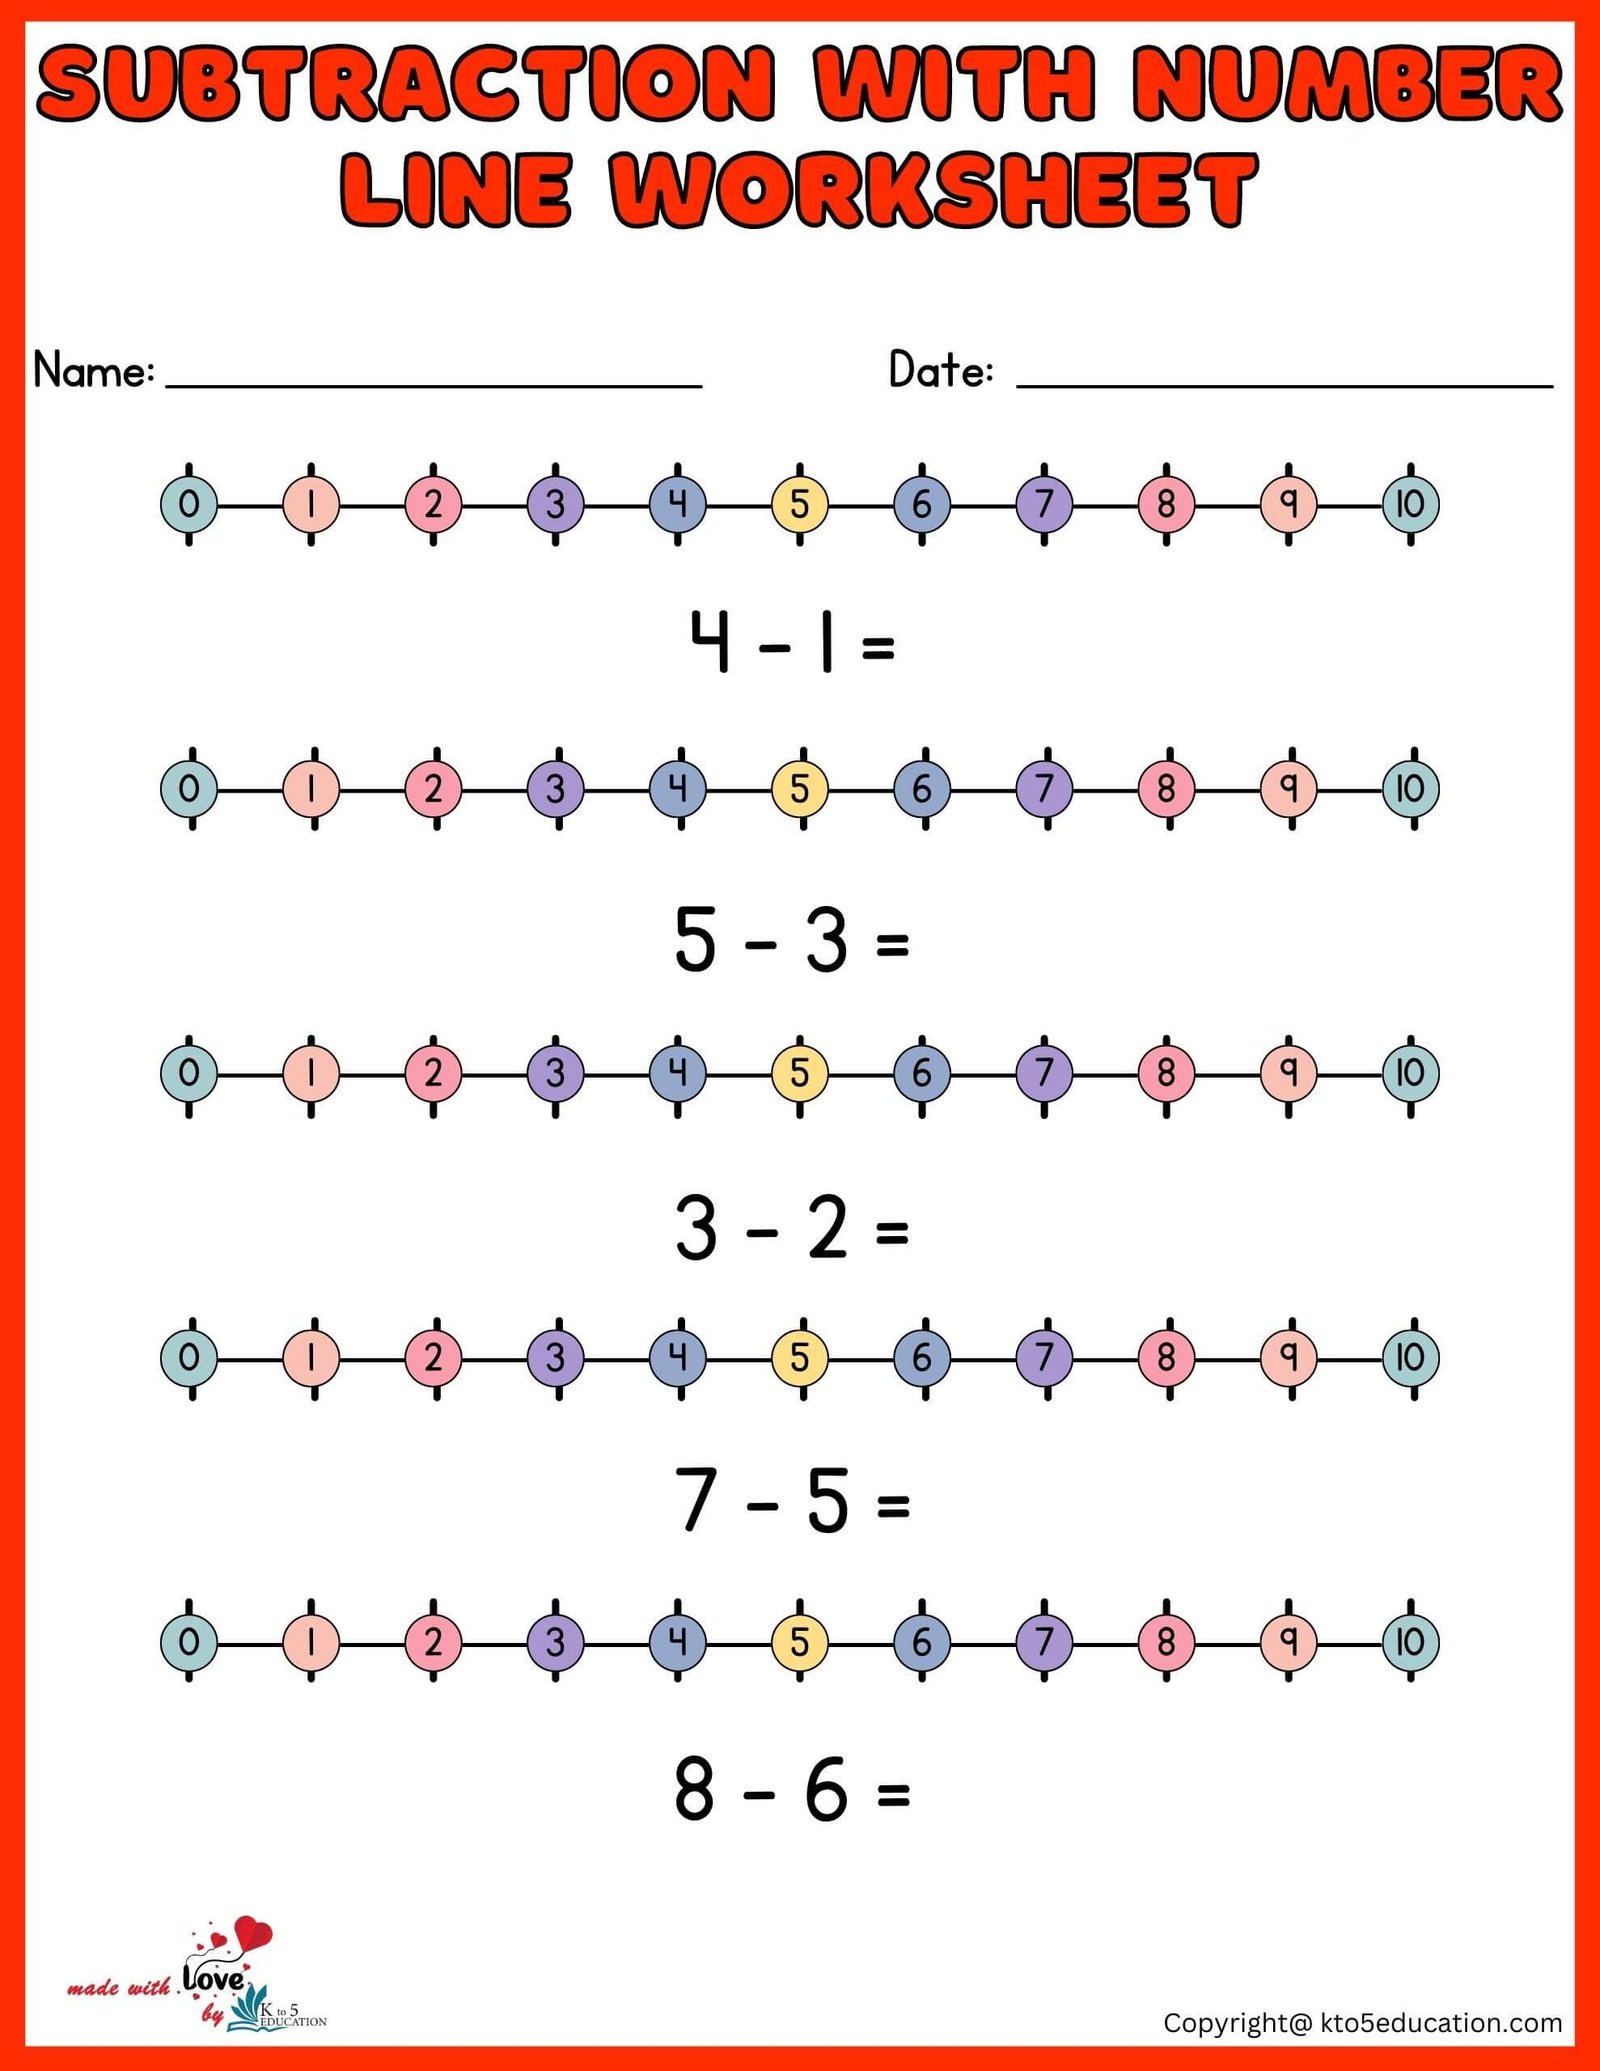 Subtraction With Number Line Printable Worksheet 1-10